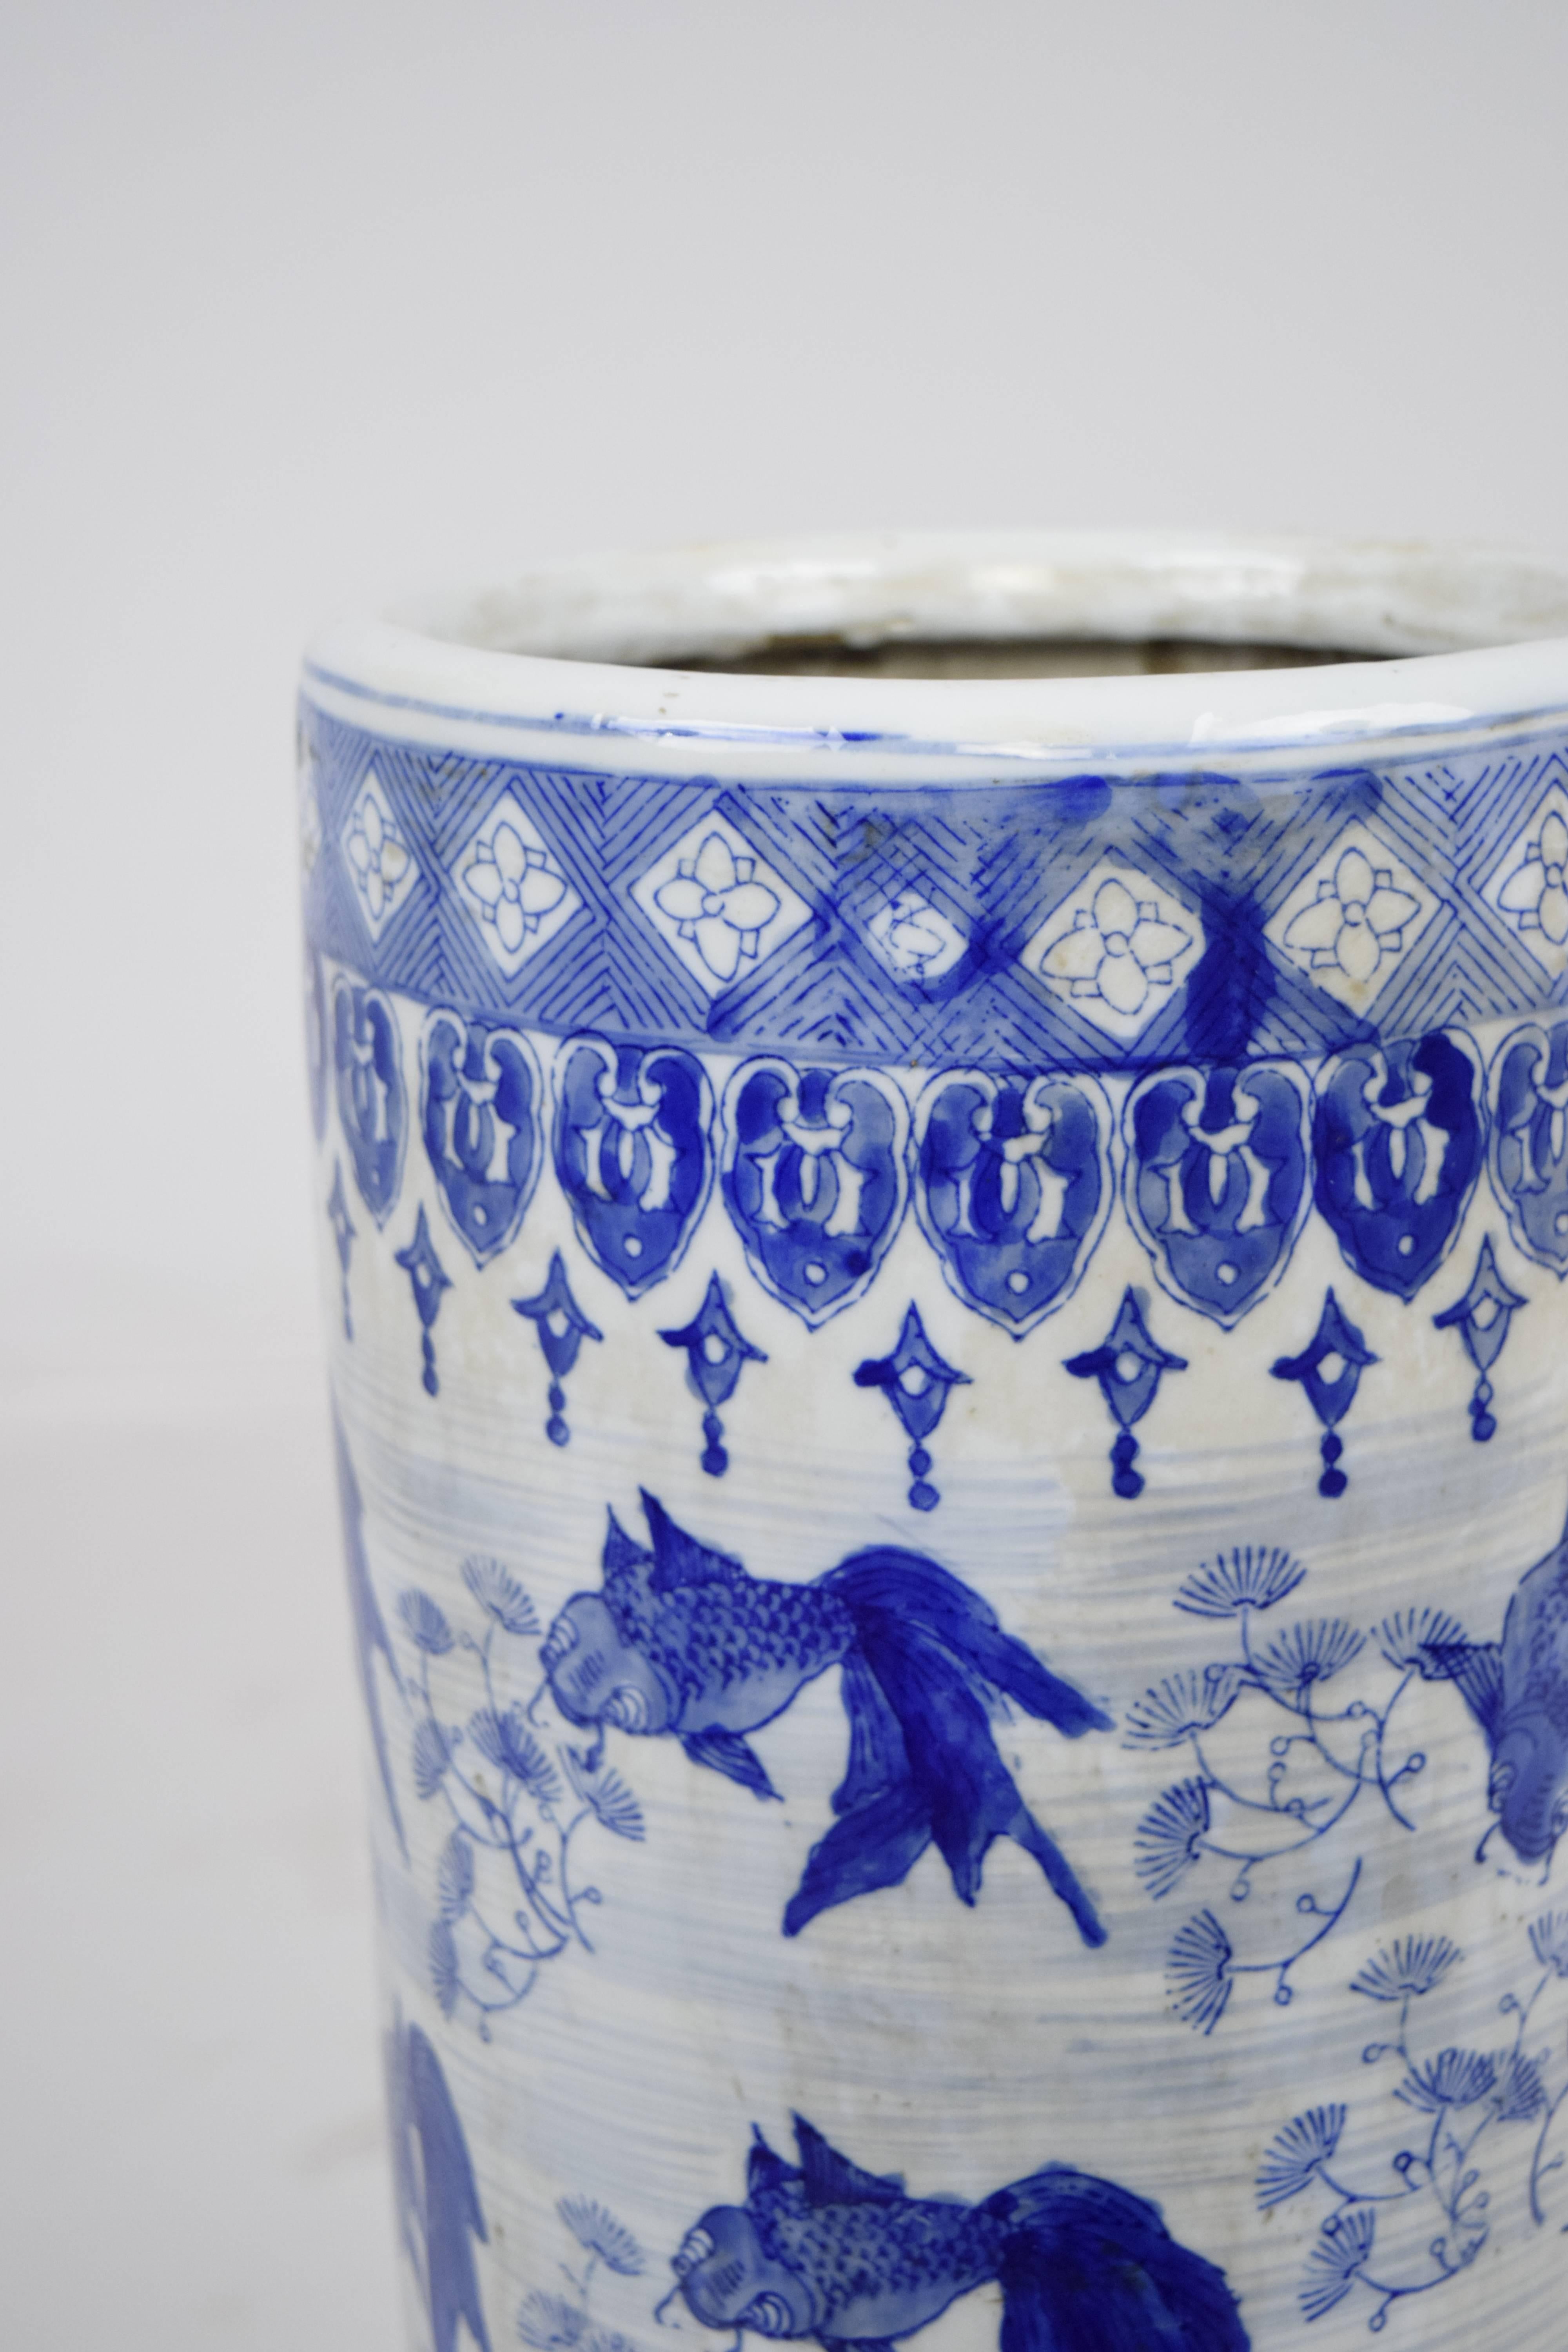 This 1950s Vintage chinoiserie style umbrella stand is made from porcelain. The blue and white style of Chinese porcelains is one of the most popular styles to come from China in the middle of the 20th Century. These porcelain pieces are made by